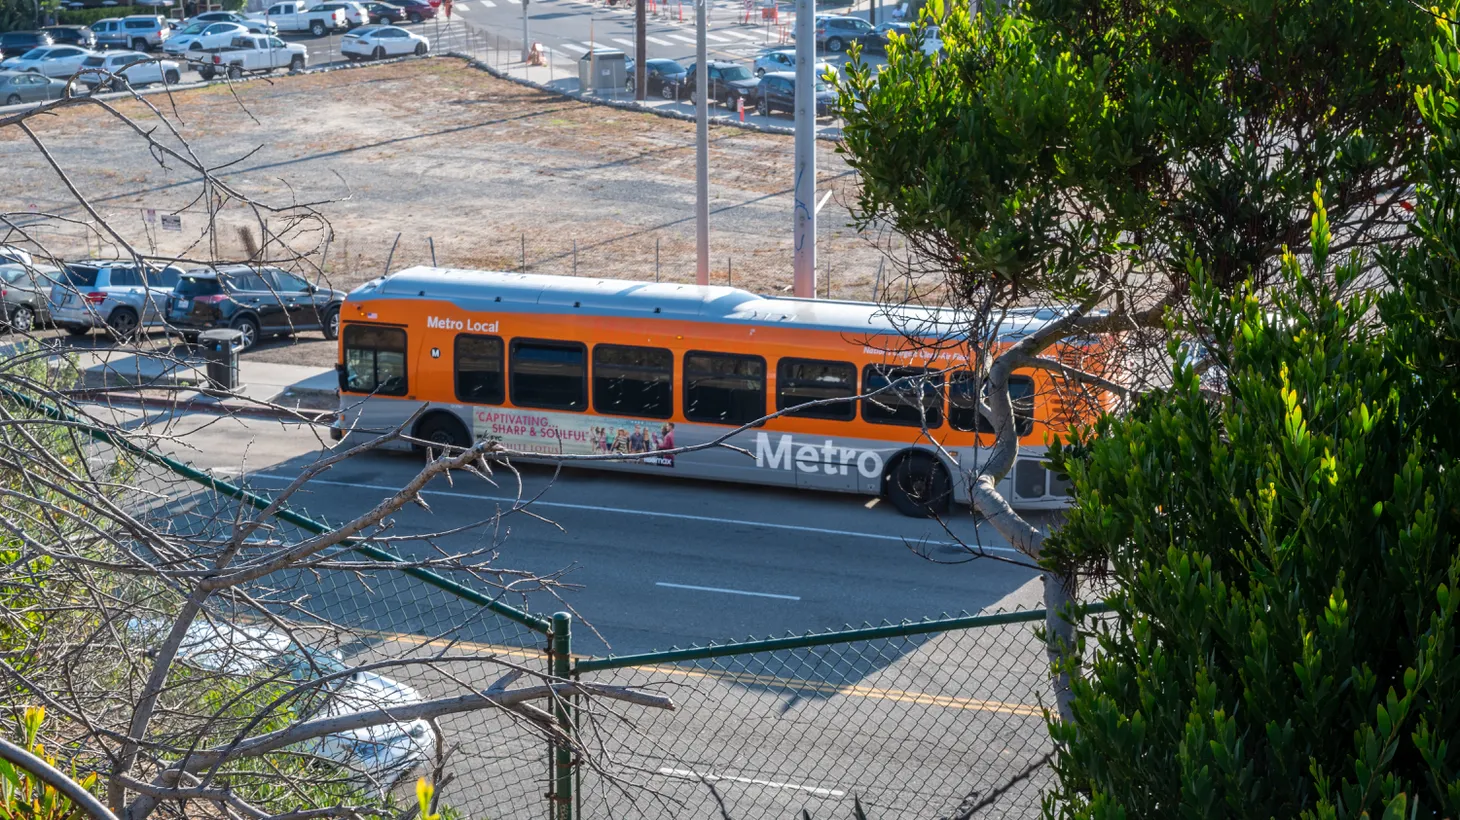 A Los Angeles Metro bus stops in Playa Del Rey, June 26, 2022. “I see people with guns, knife fights, people doing drugs. And you absolutely cannot say anything because otherwise, they get aggressive,” says Metro rider Mayra Rodriguez about her daily experience riding the system to work.